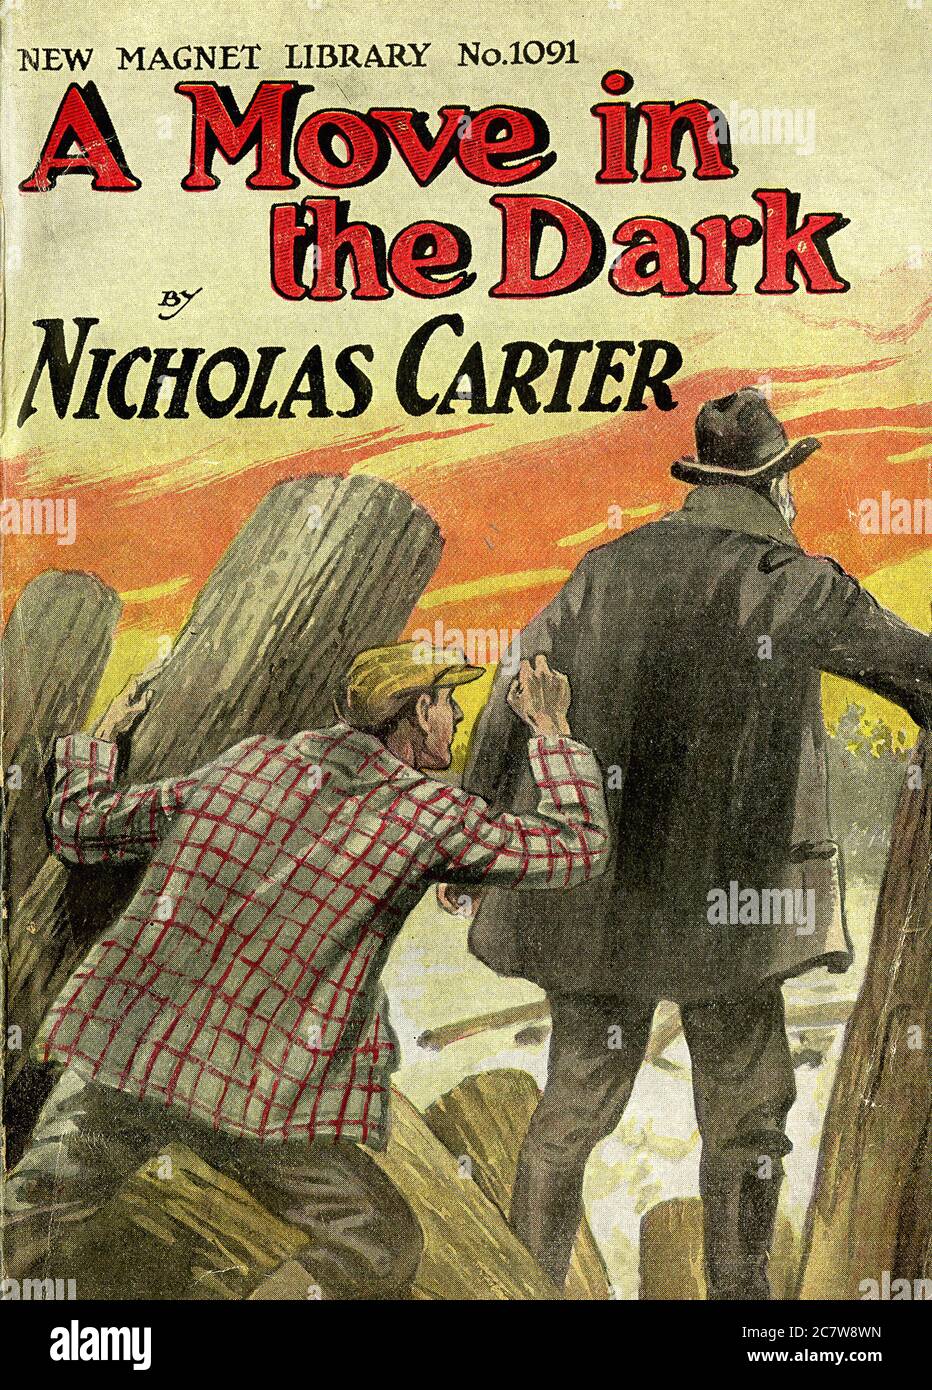 Nicholas Carter - A Move in the Dark - New Magnet Library - Vintage Pulp Literary Stock Photo